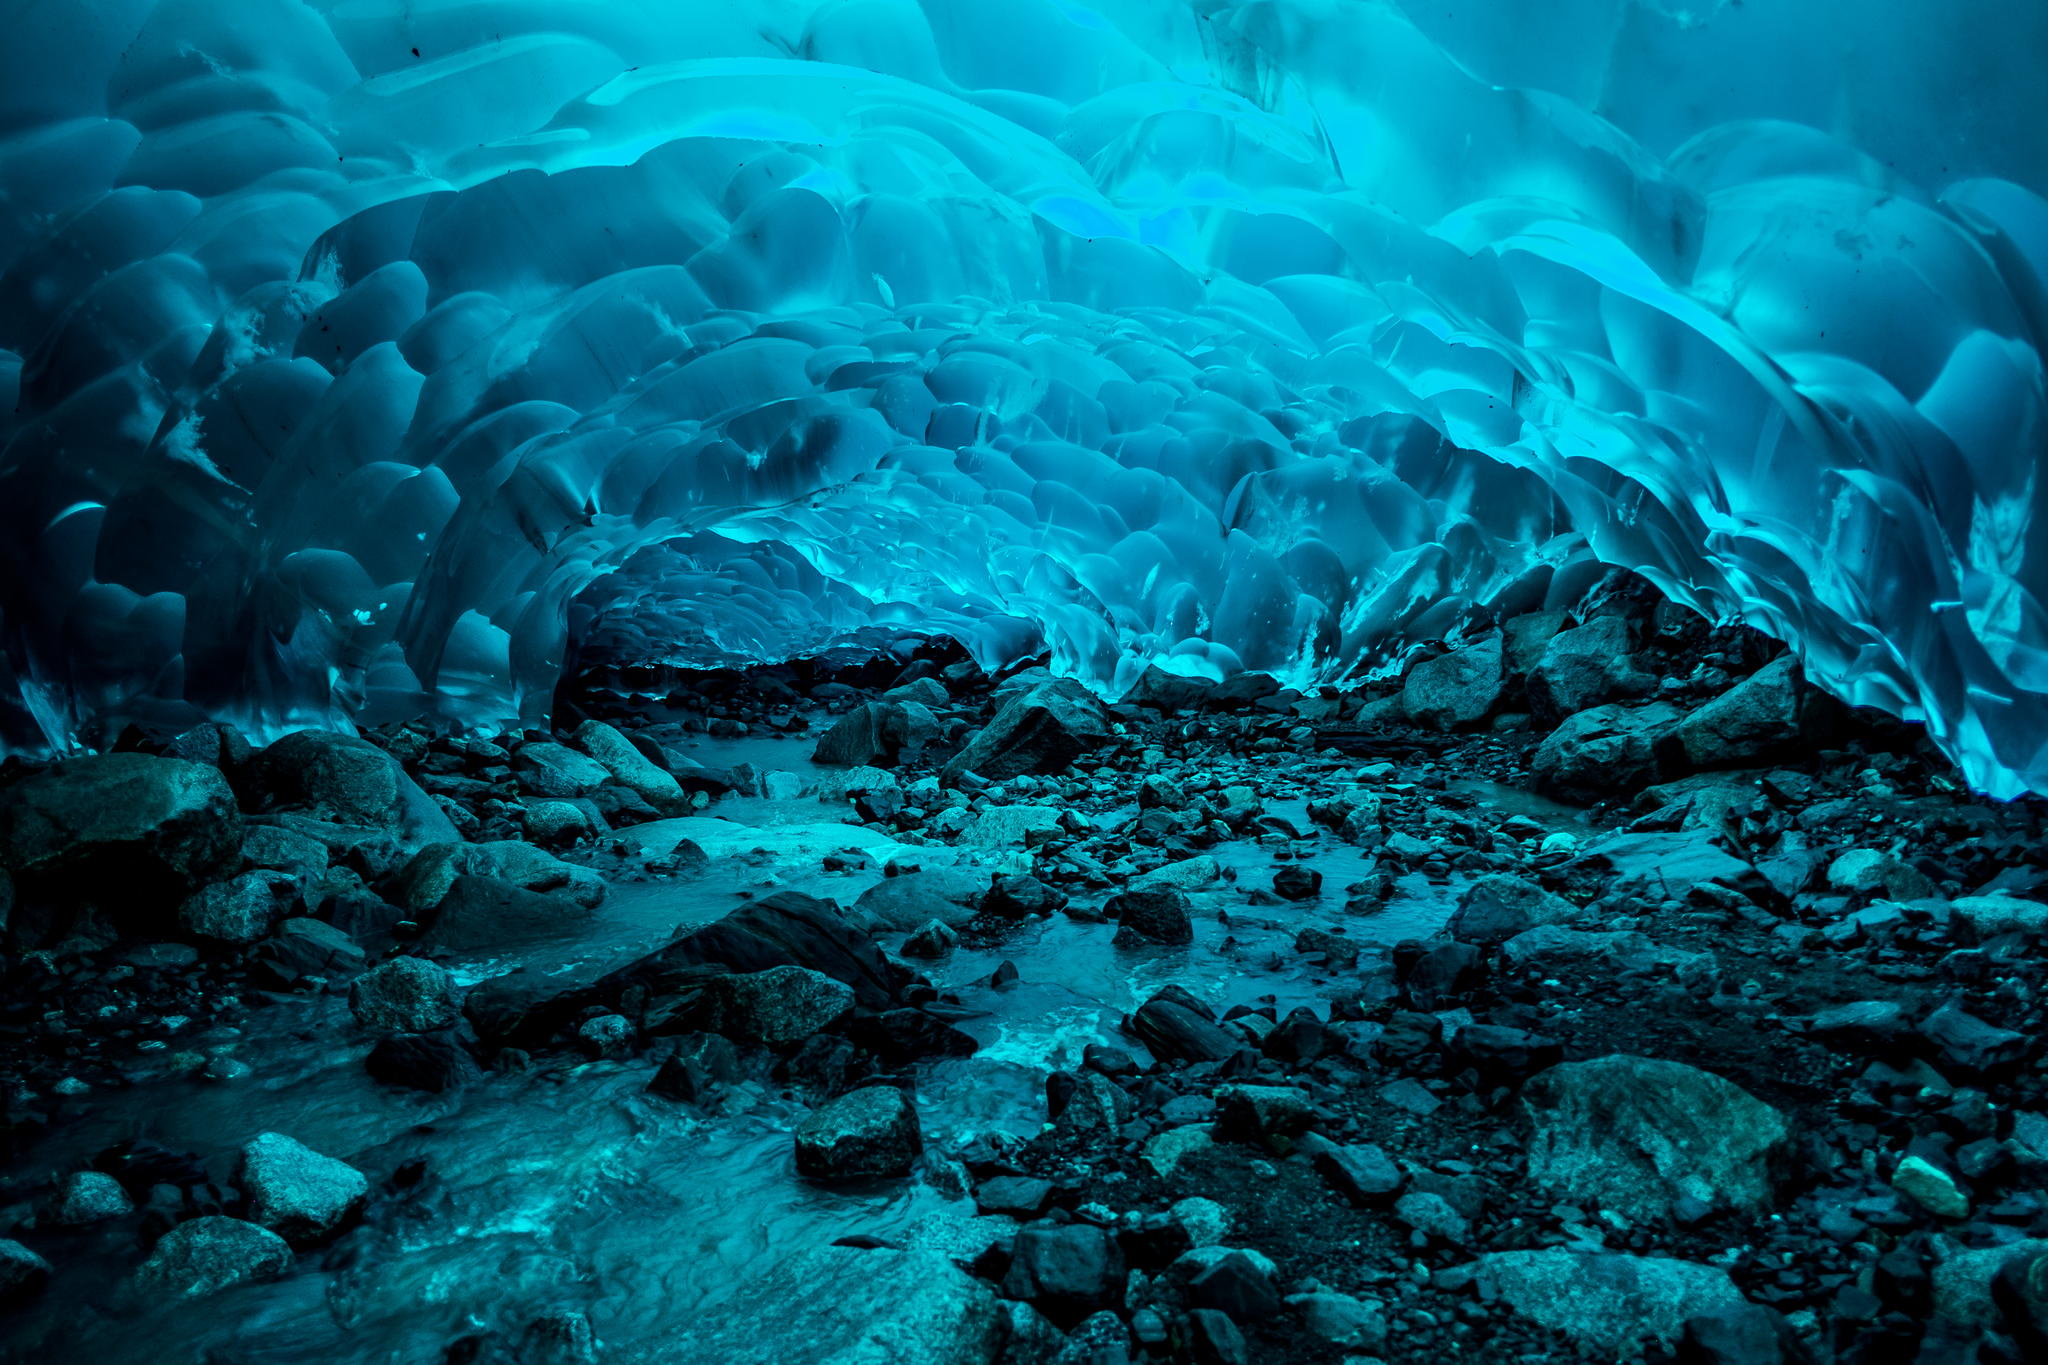 Ice Cave Backgrounds, Compatible - PC, Mobile, Gadgets| 2048x1365 px